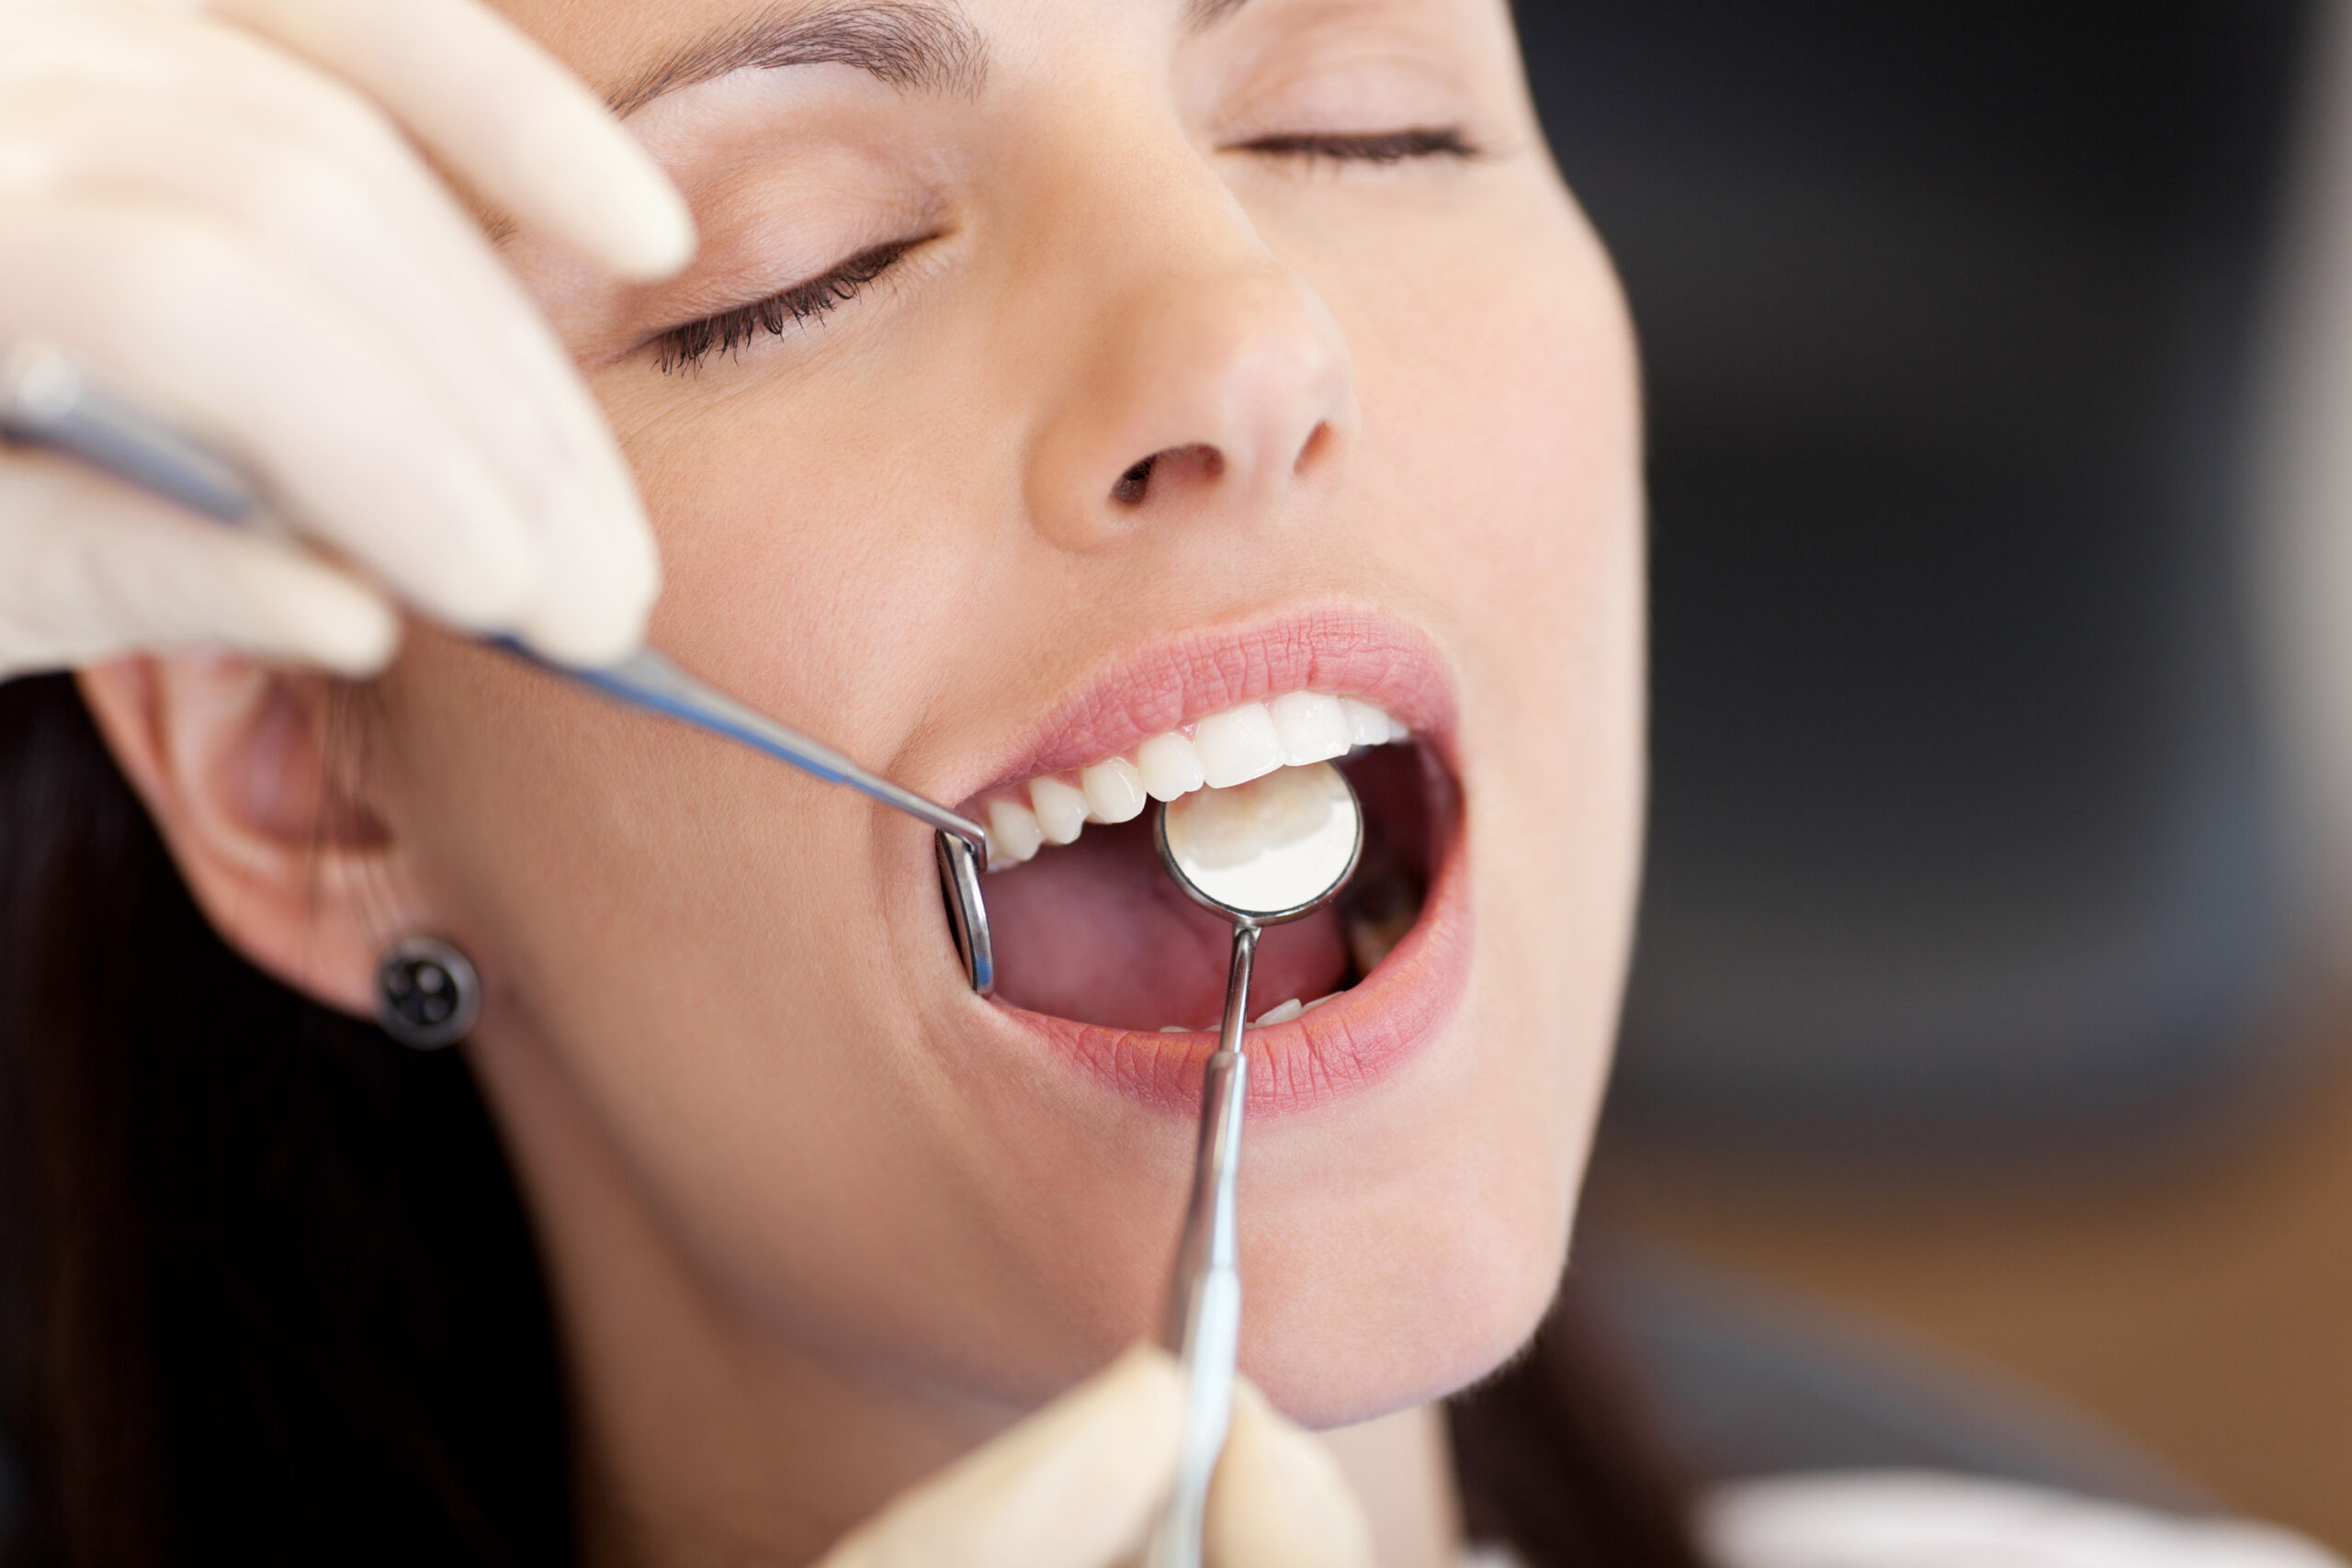 what are the benefits of sedation in dentistry